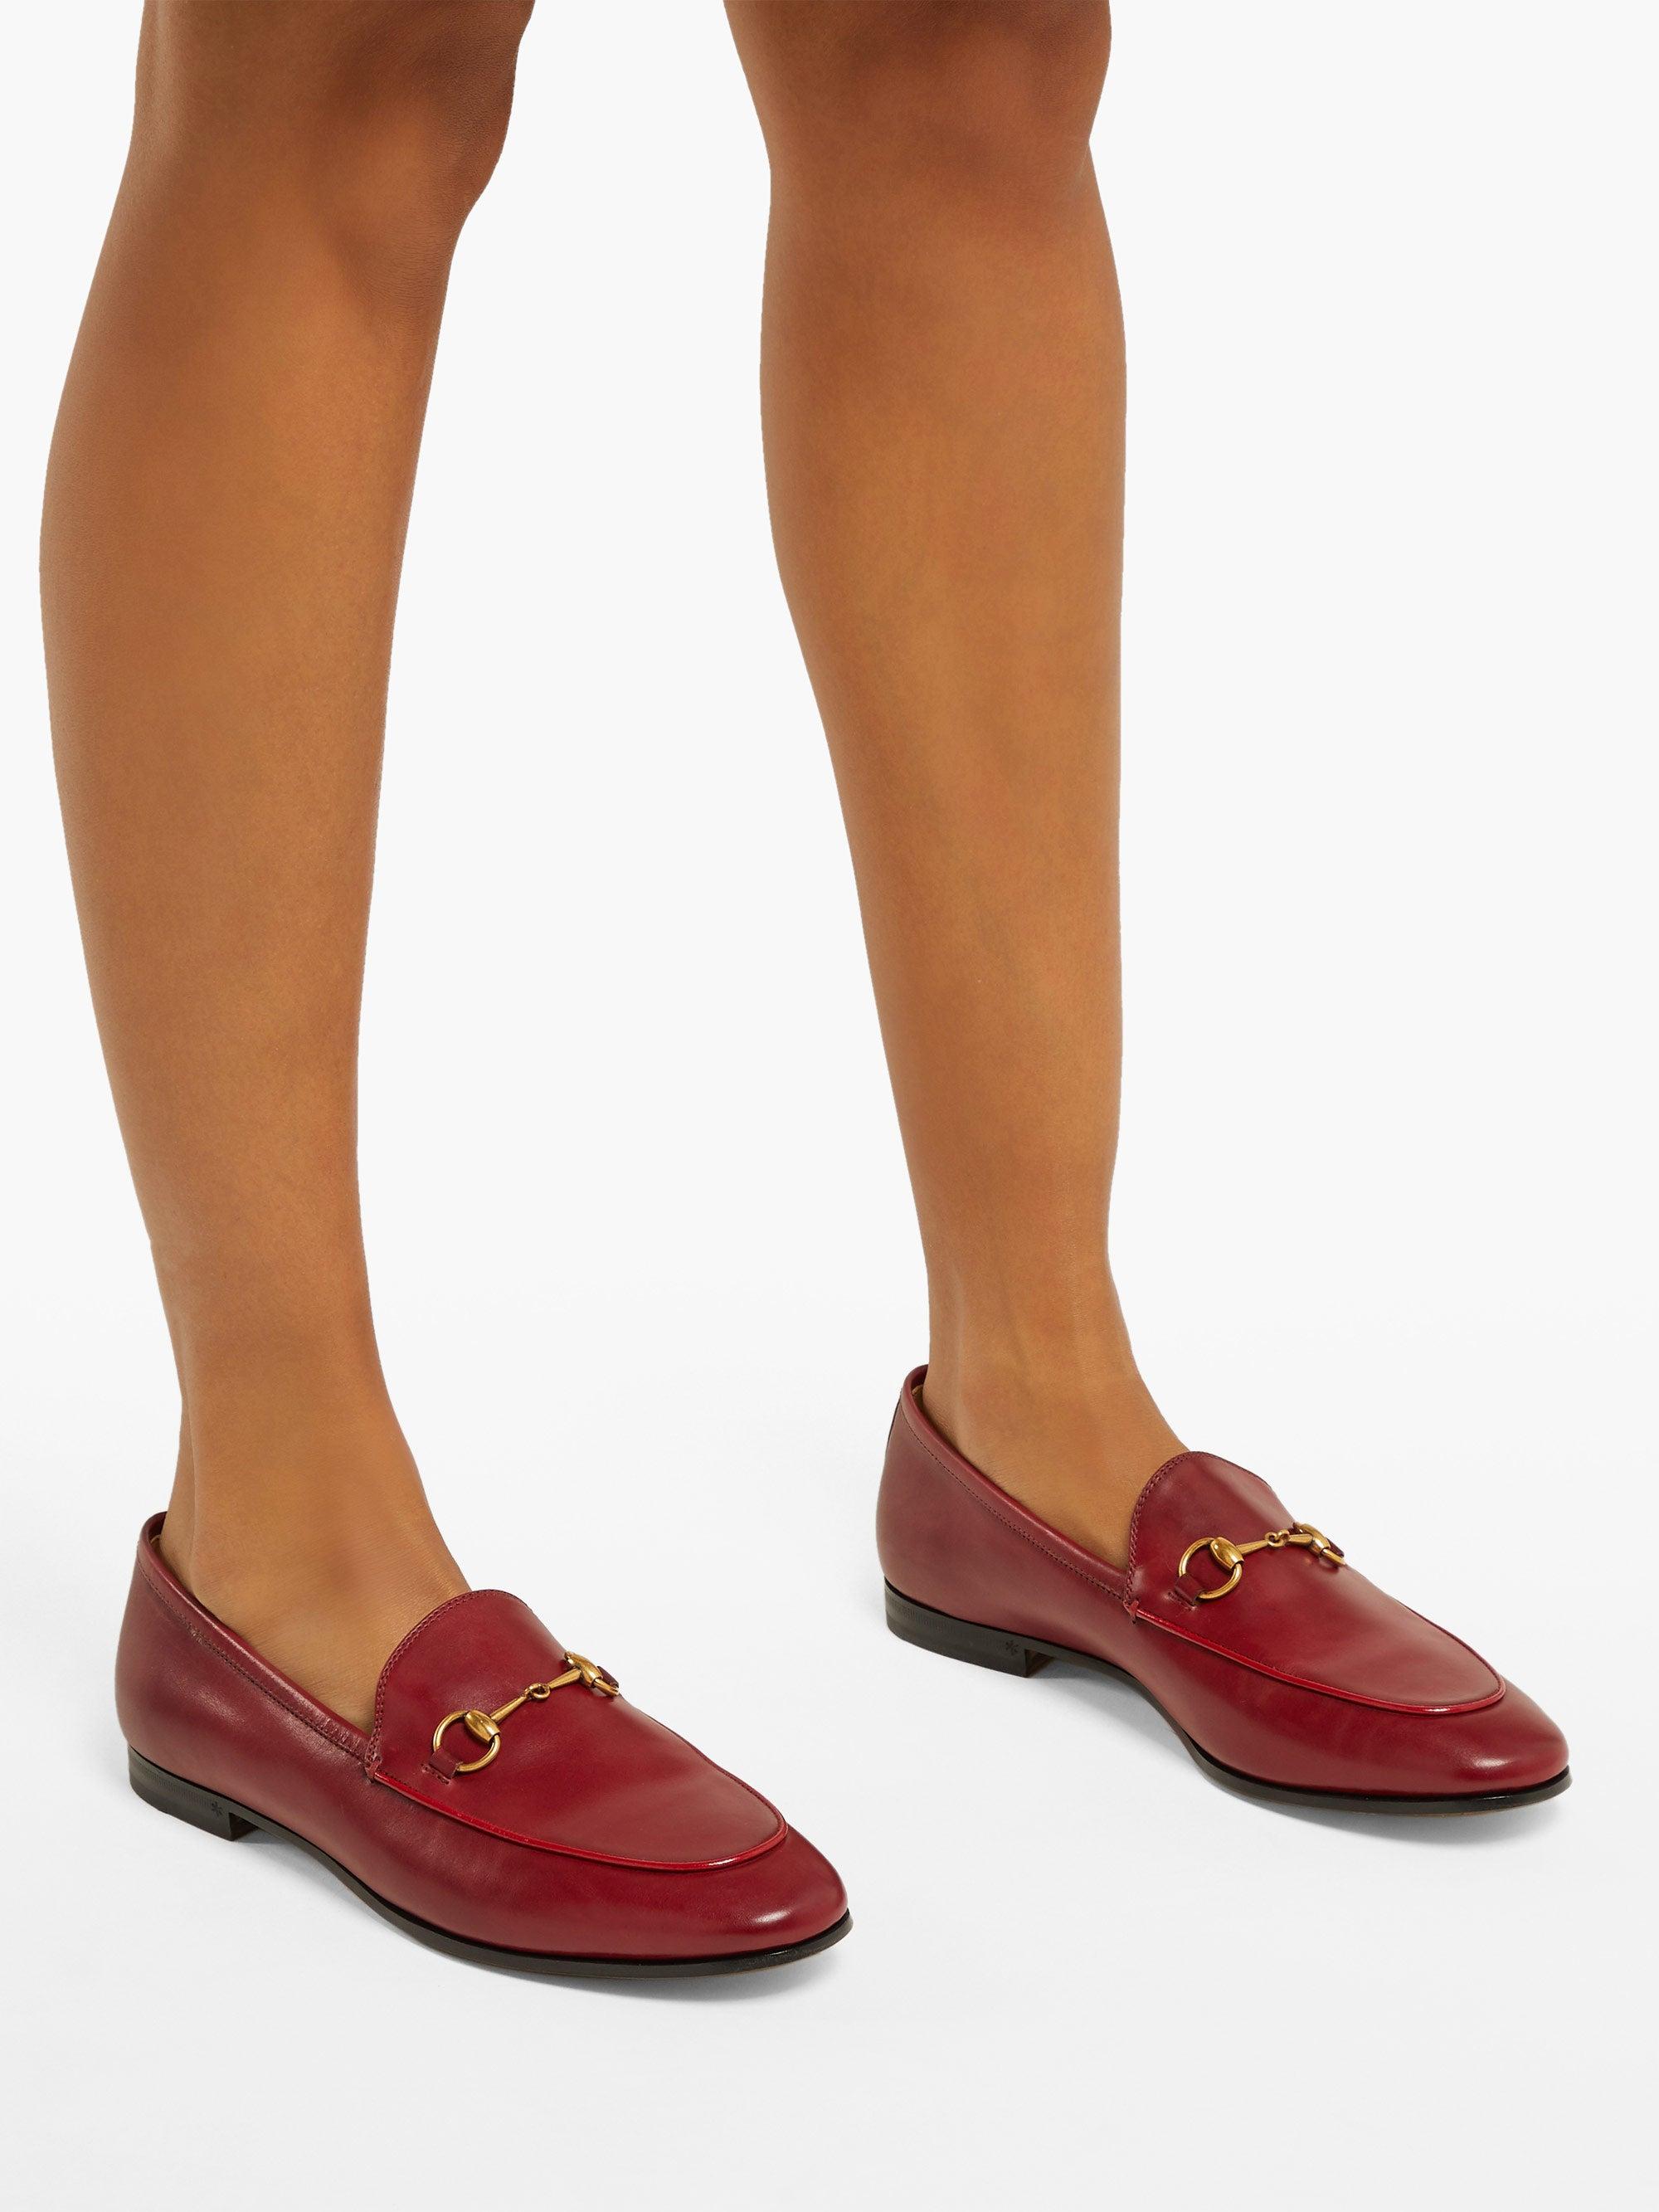 Gucci Jordaan Leather Loafers in Red - Lyst